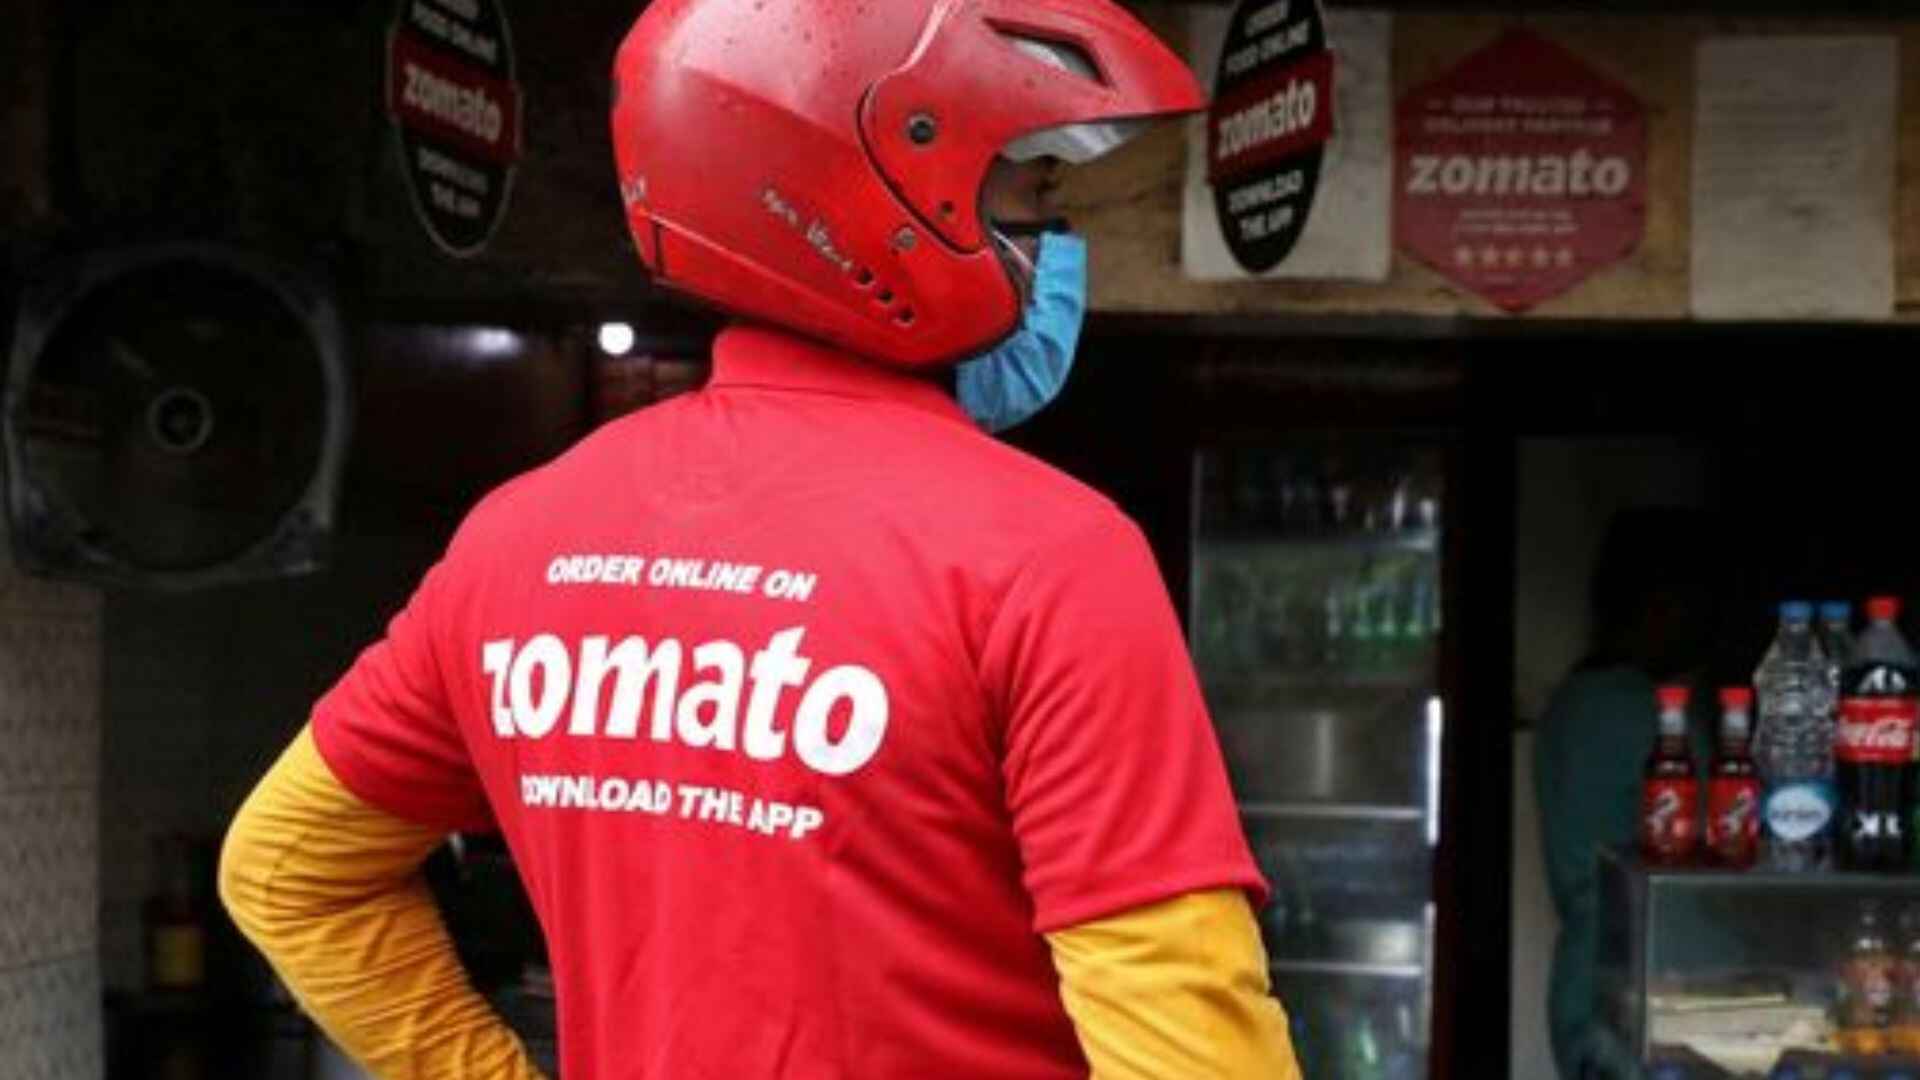 Is Zomato Charging Too Much? Chennai Man’s Post Sparks Online Discussion